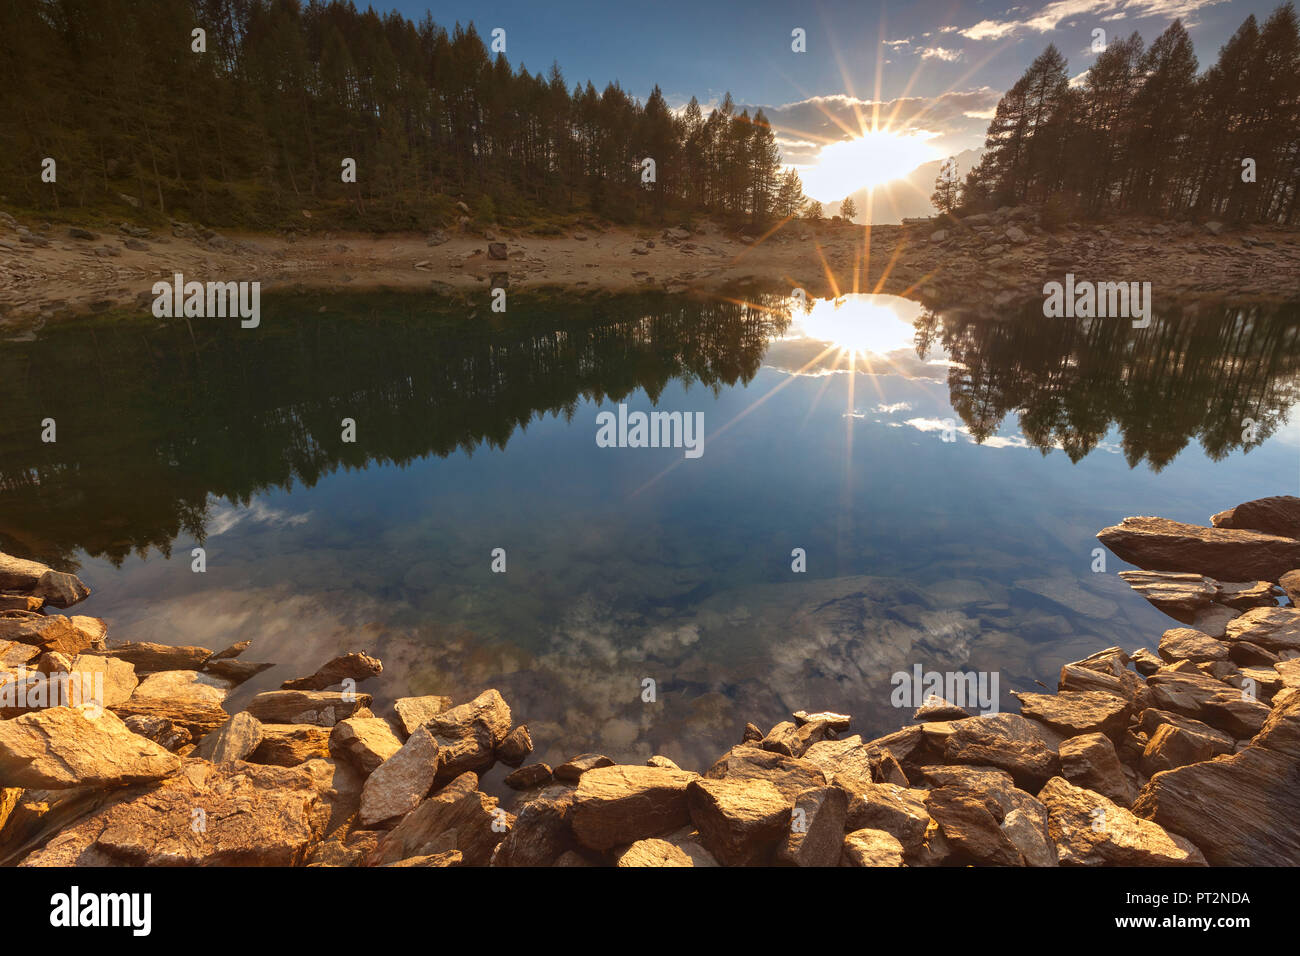 Lago Azzurro High Resolution Stock Photography and Images - Alamy